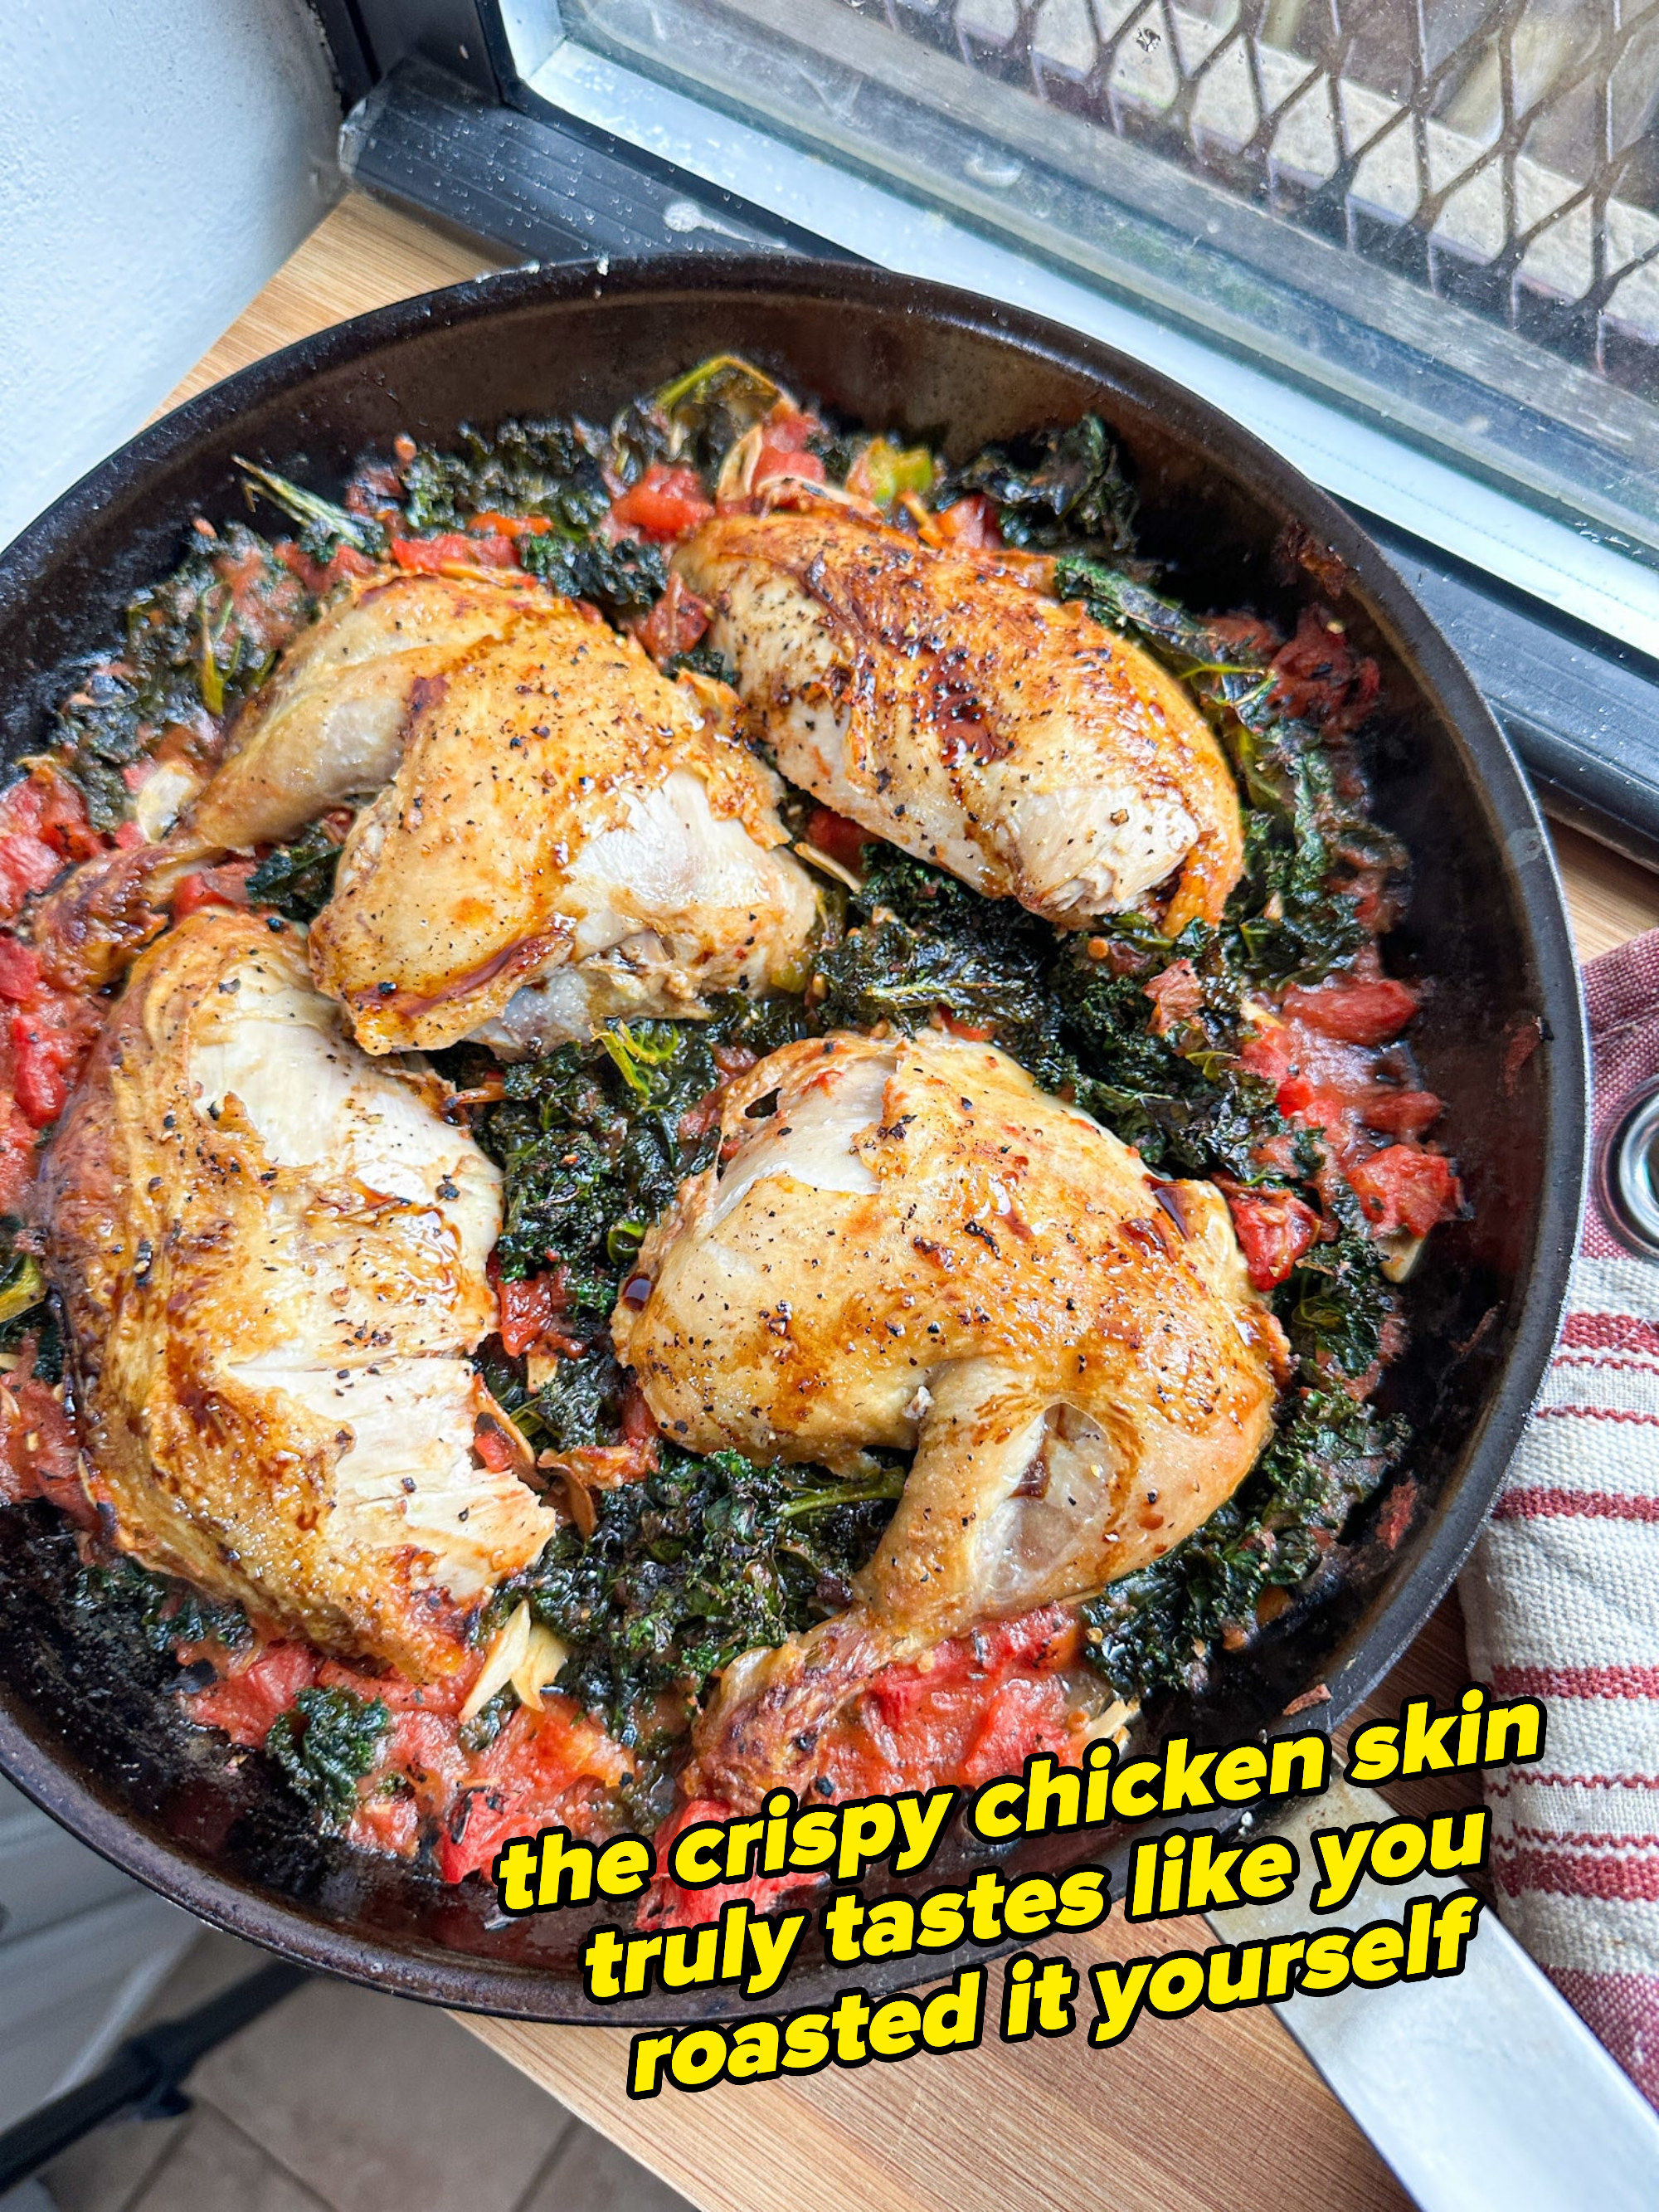 crispy chicken pieces of wilted kale and tomatoes in a skillet, where the crispy chicken skin truly tastes like you roasted it yourself